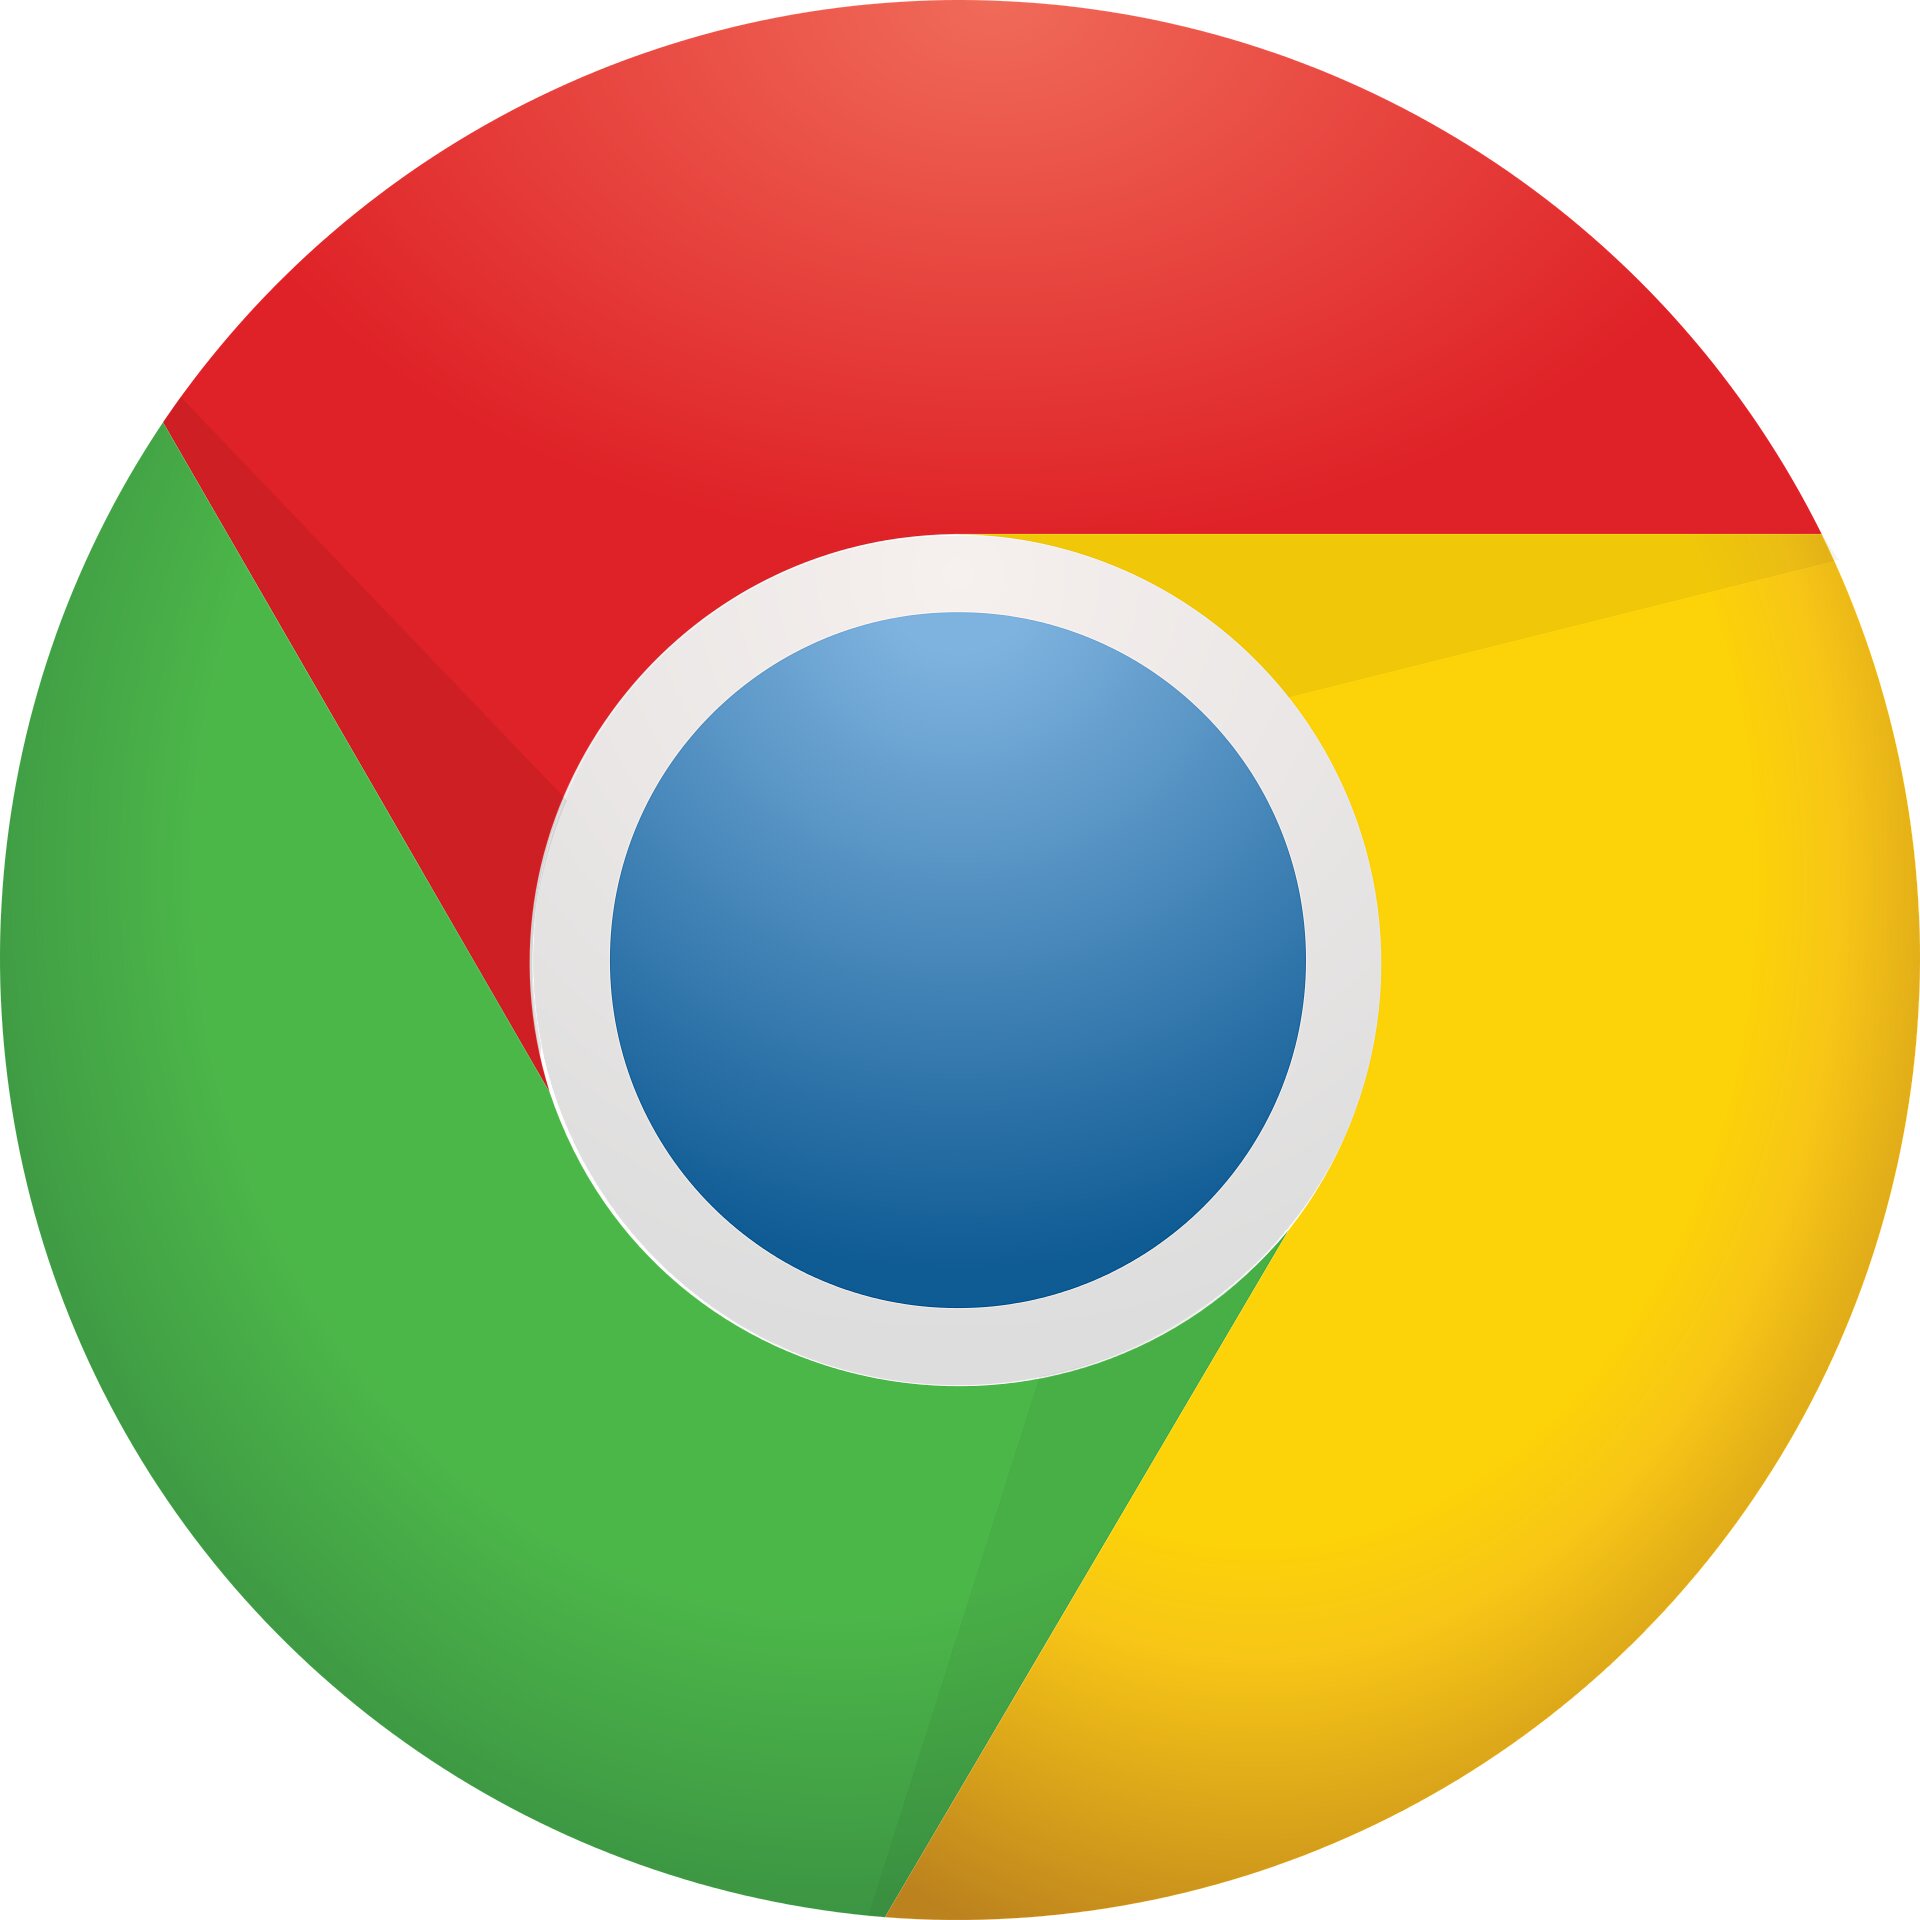 Researchers issue warning over Chrome extensions that access